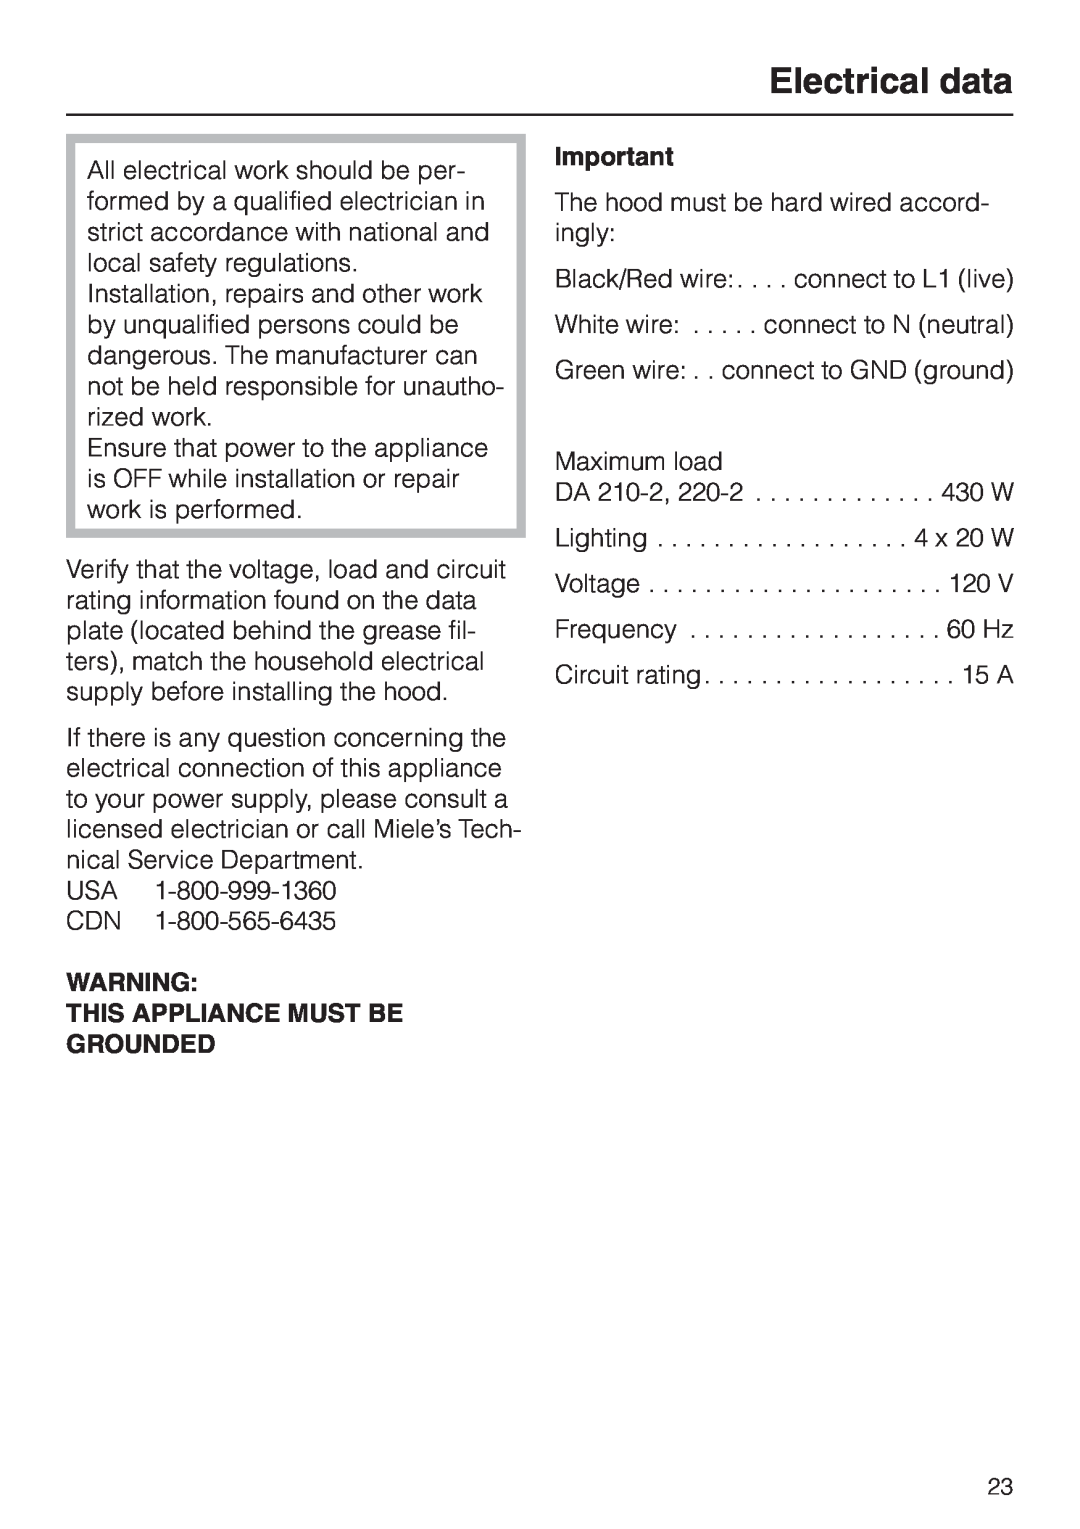 Miele DA210-3 installation instructions Electrical data, This Appliance Must Be Grounded 